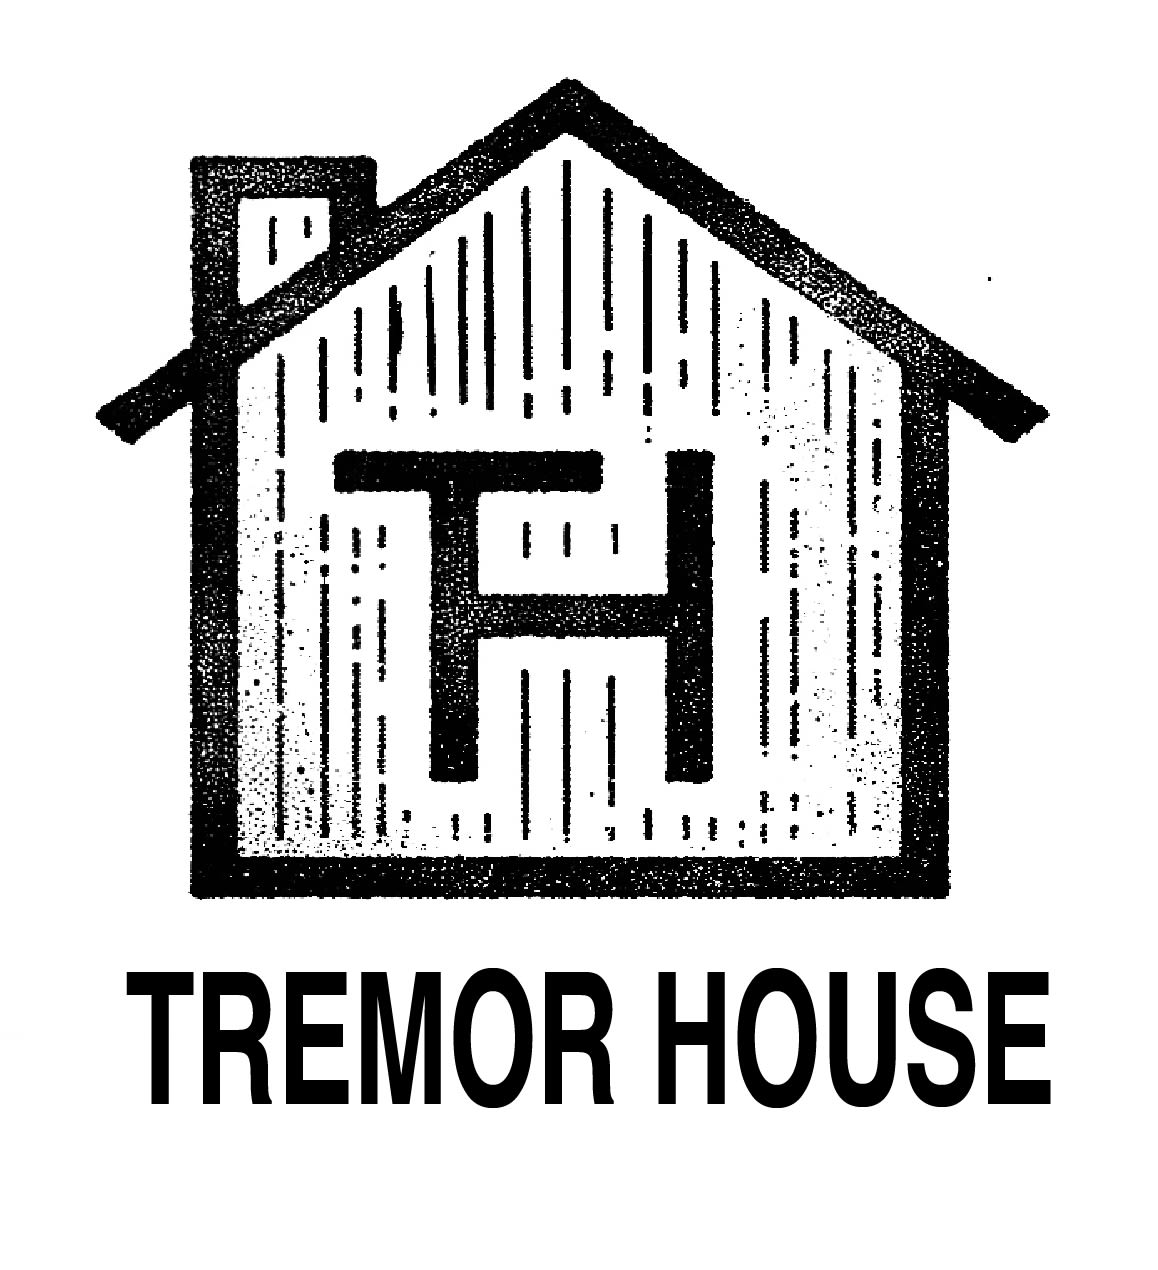 Robert Alonzo, Jonathan Spano Partner To Launch Action-Focused Production Company Tremor House